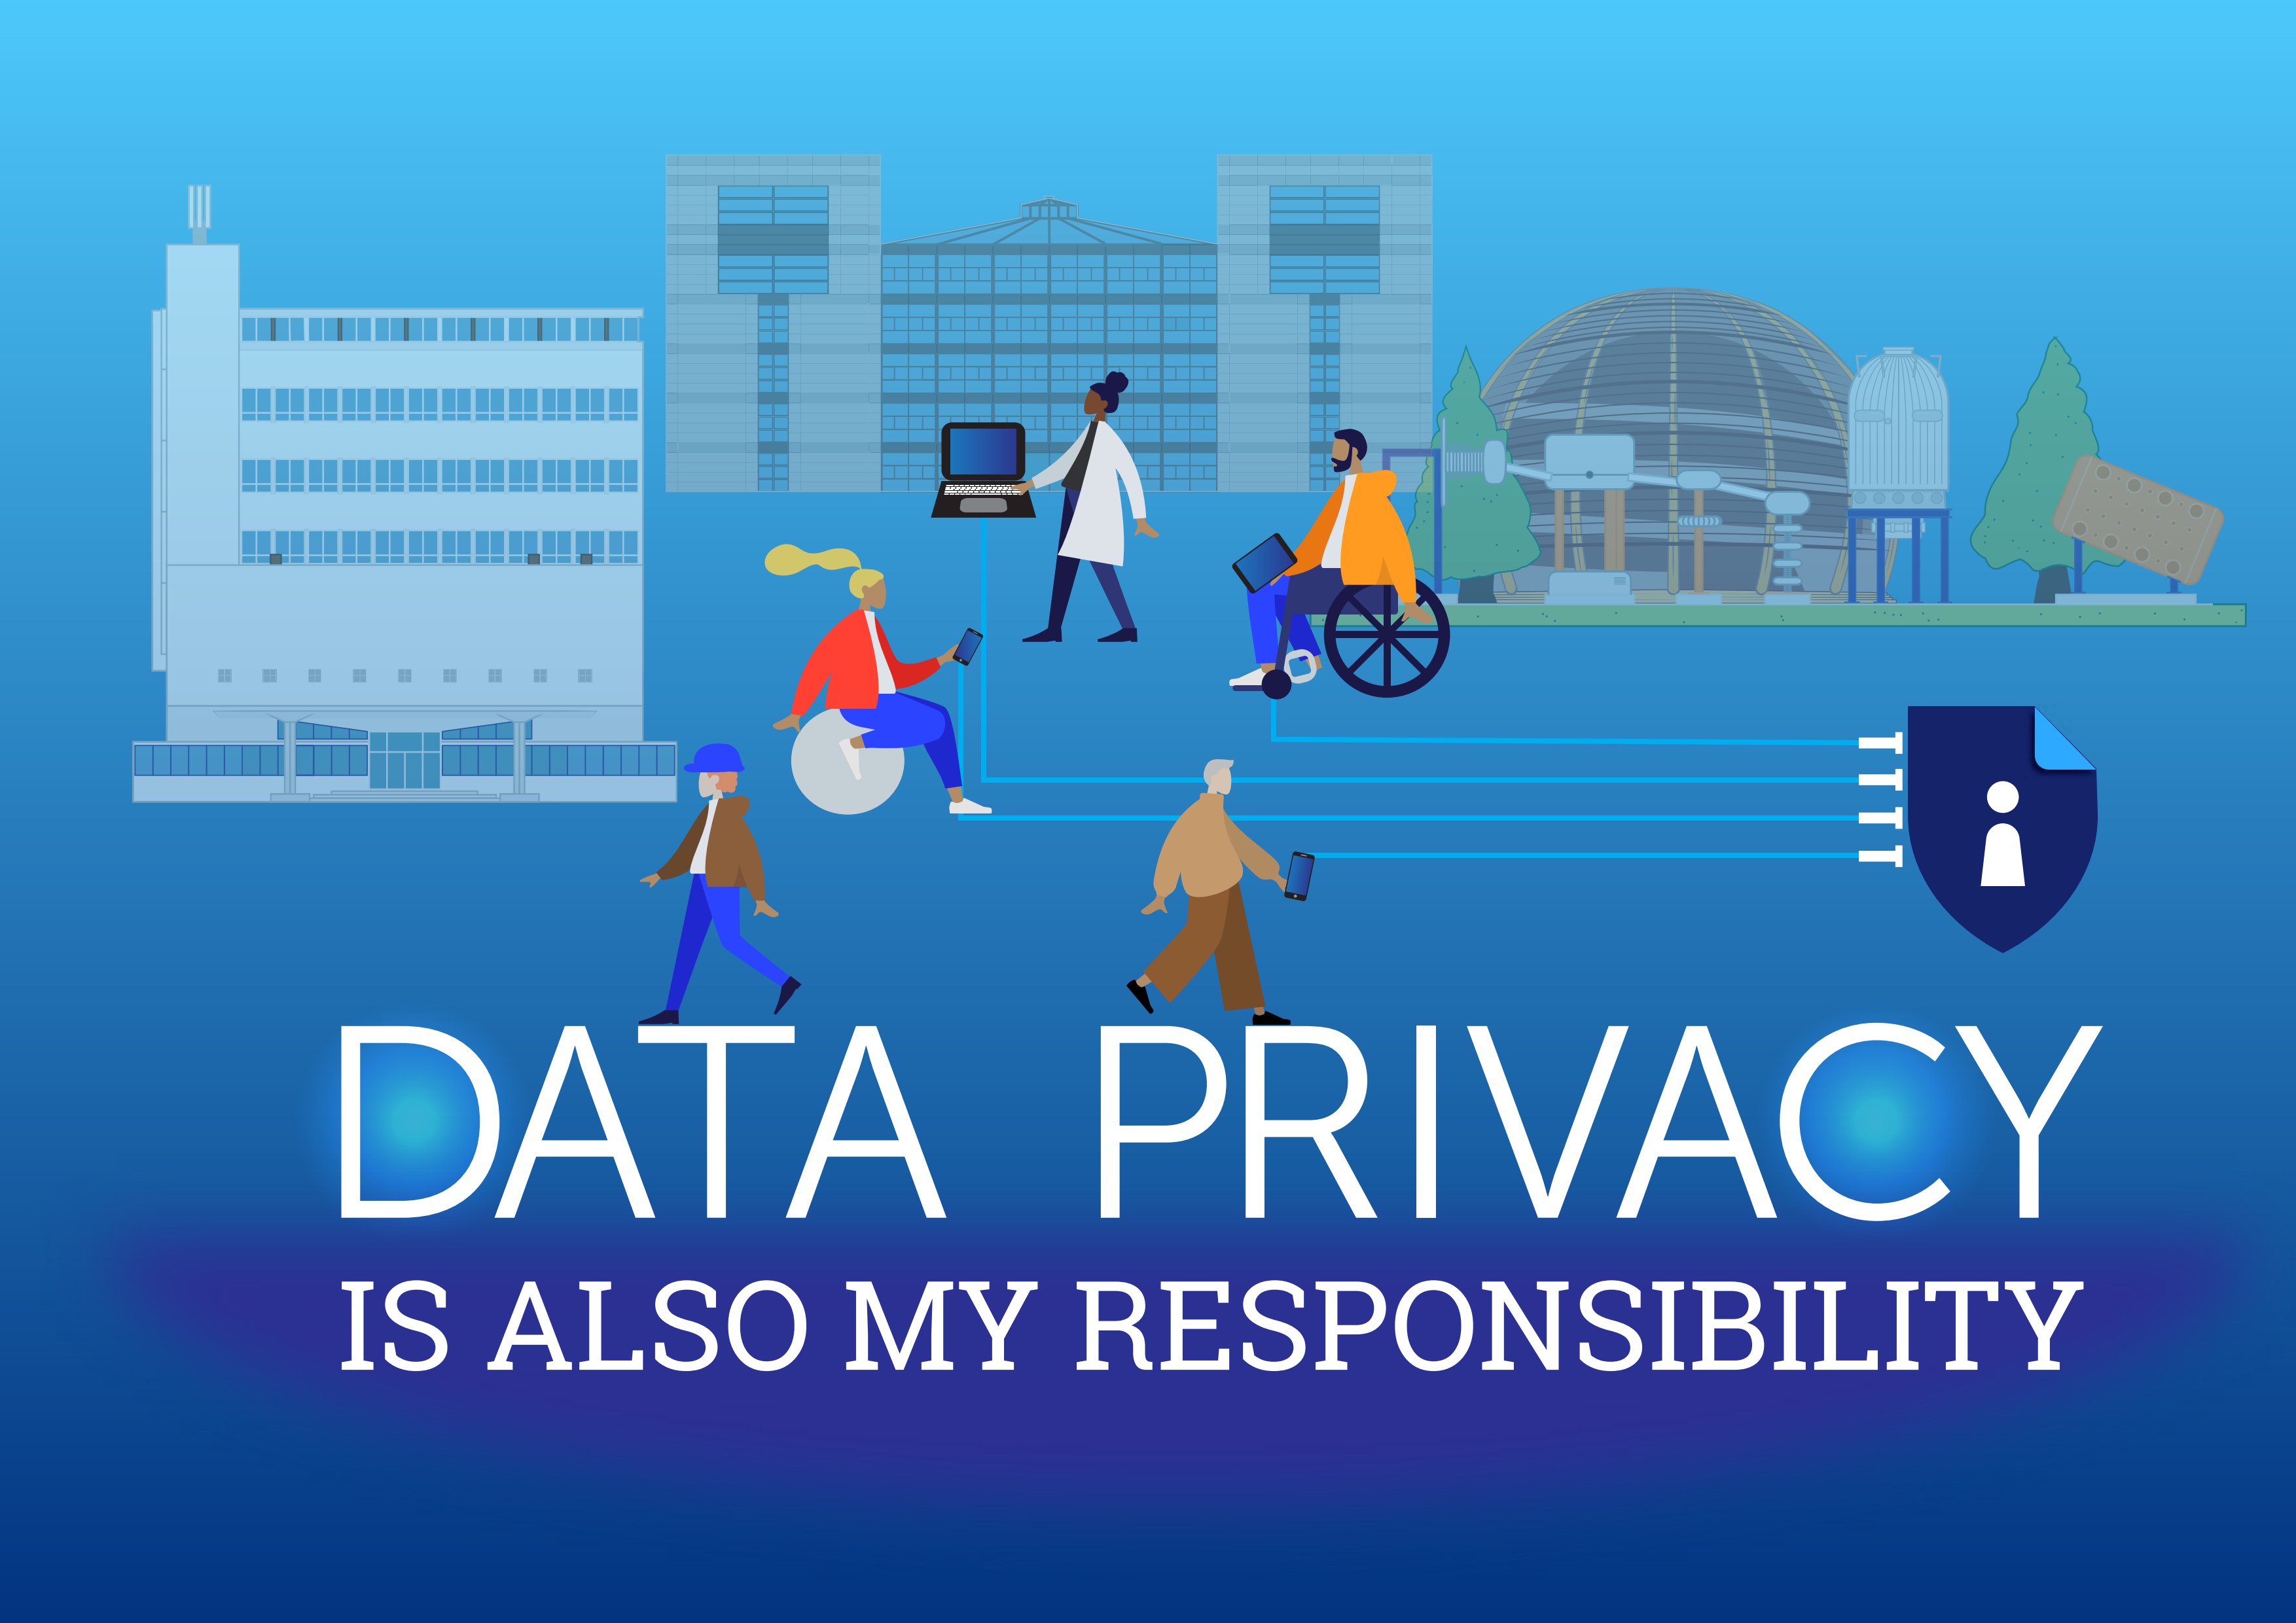 Data Privacy is also my responsibility